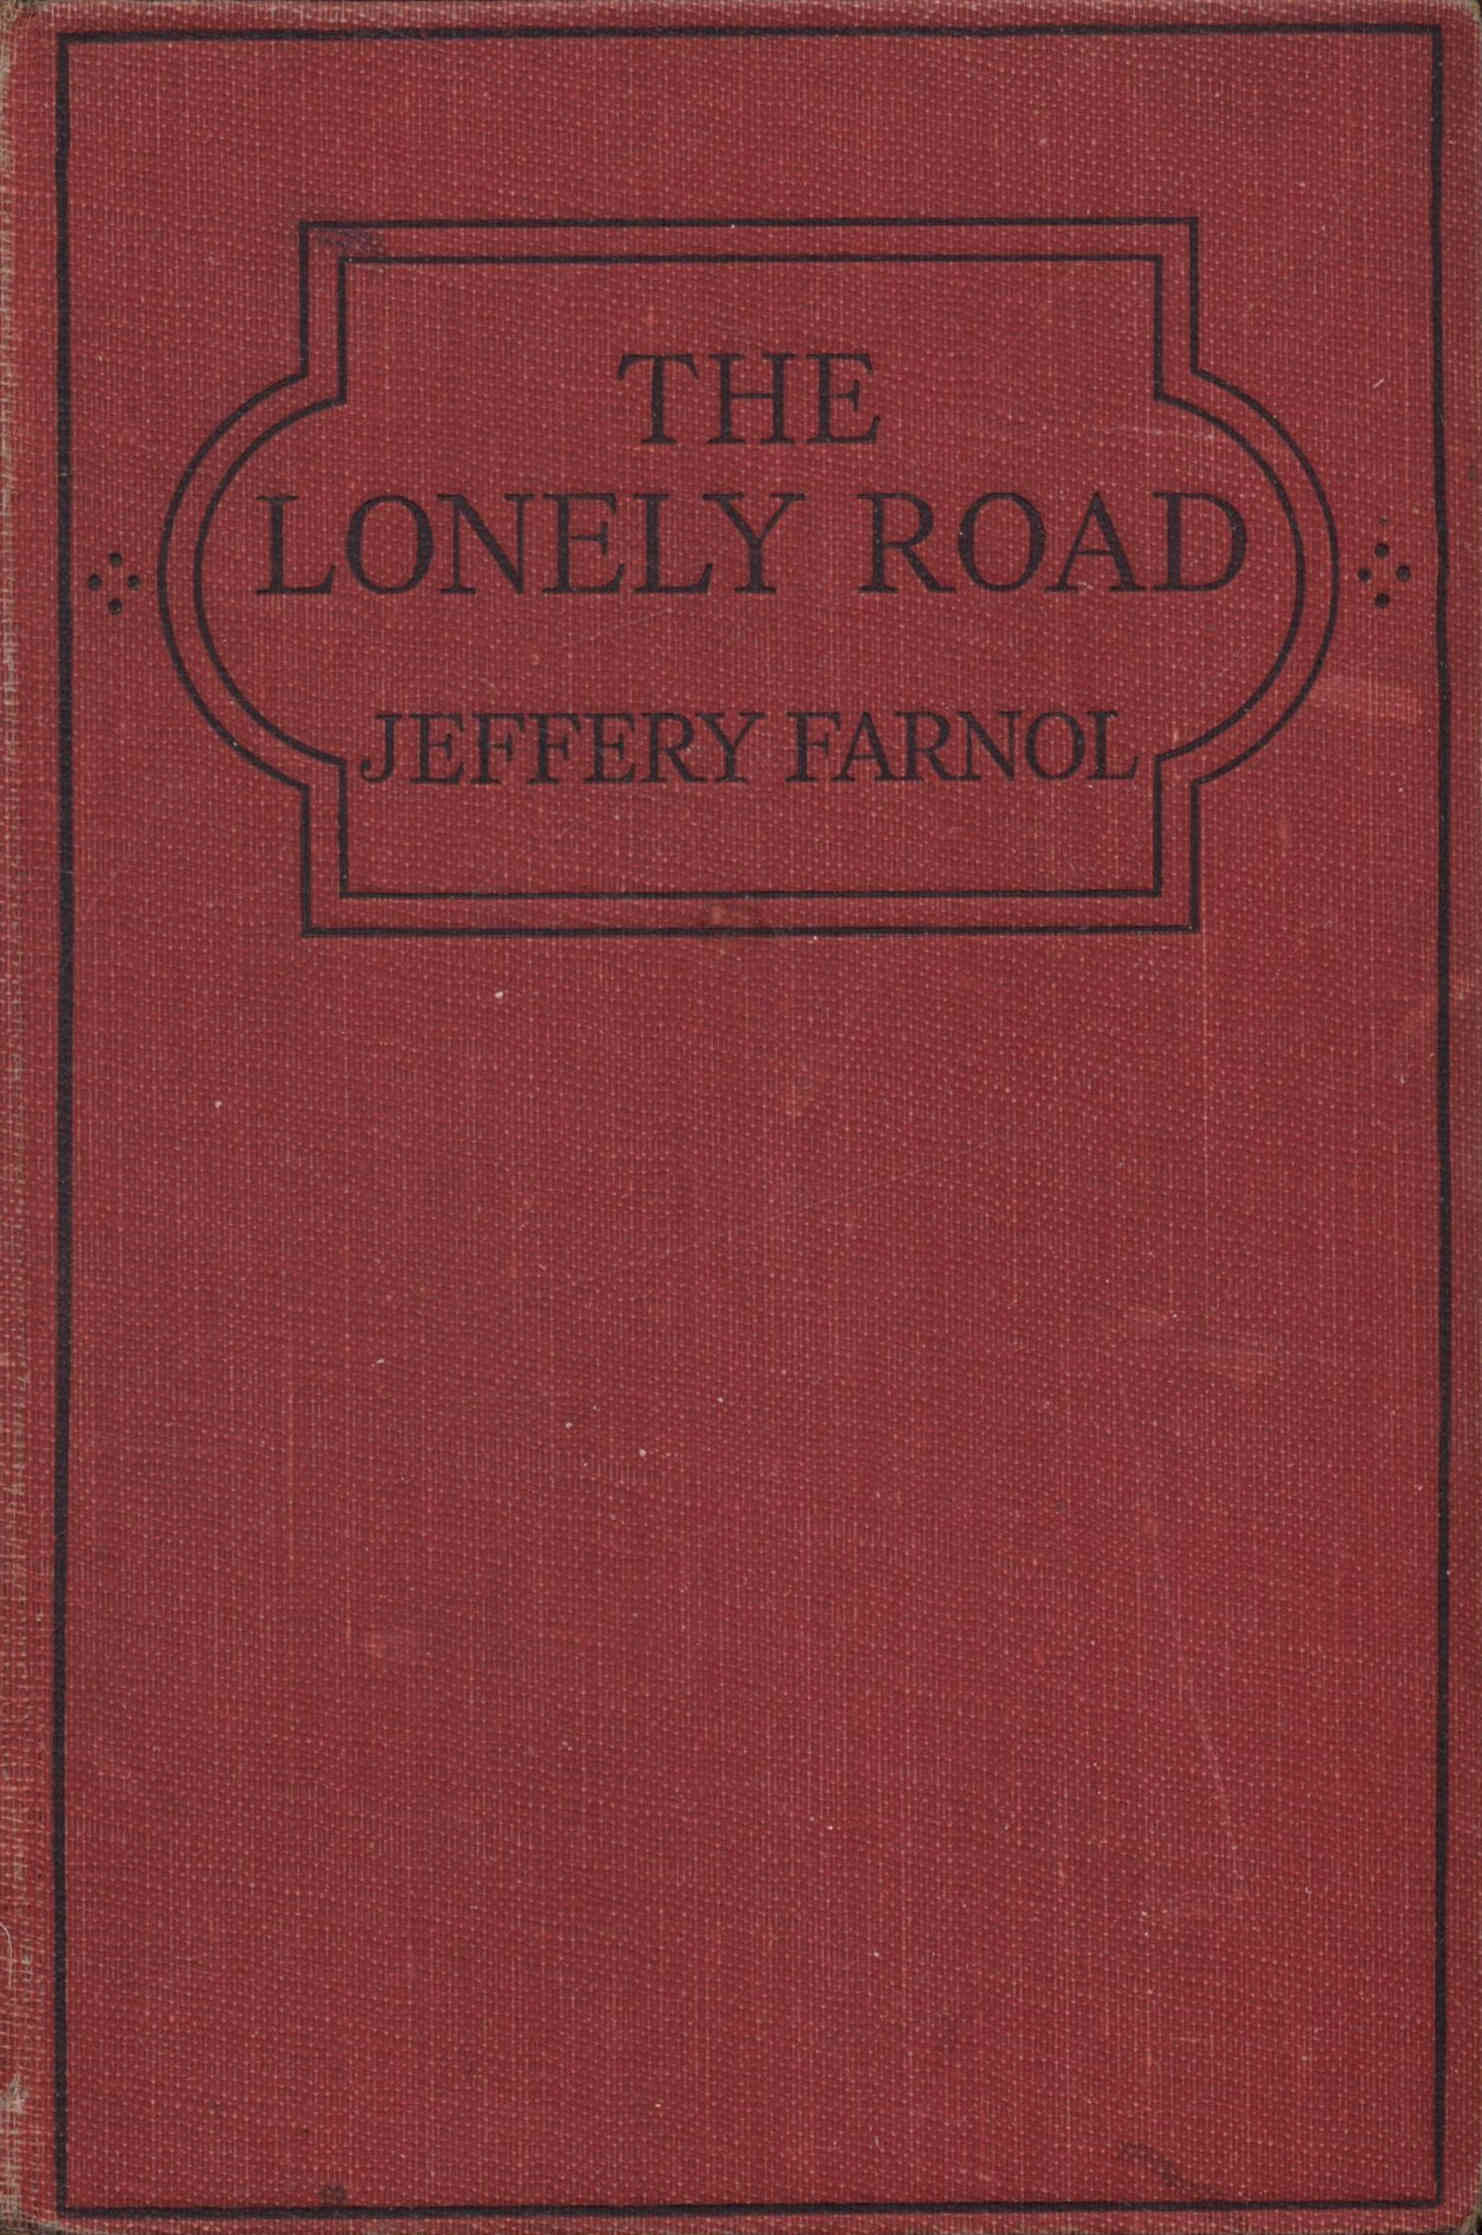 The Distributed Proofreaders Canada eBook of The Lonely Roadby Jeffery Farnol image